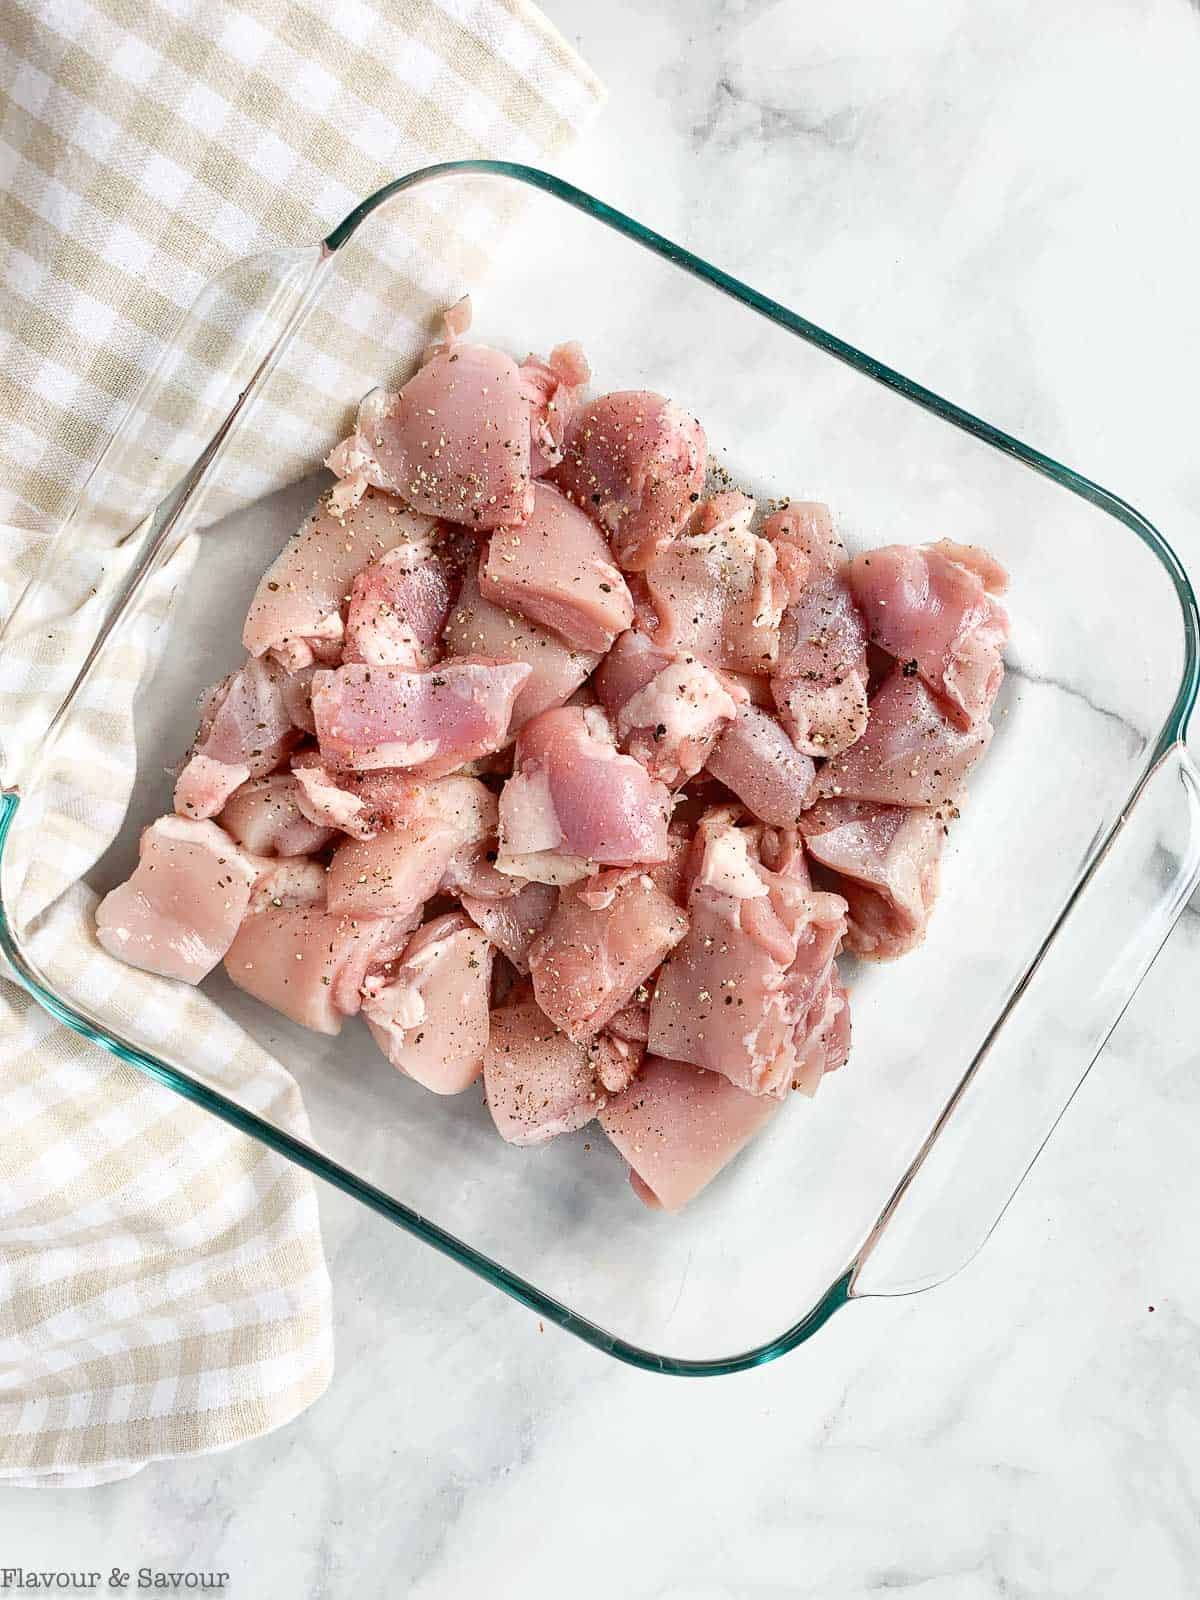 Raw chicken in a glass dish